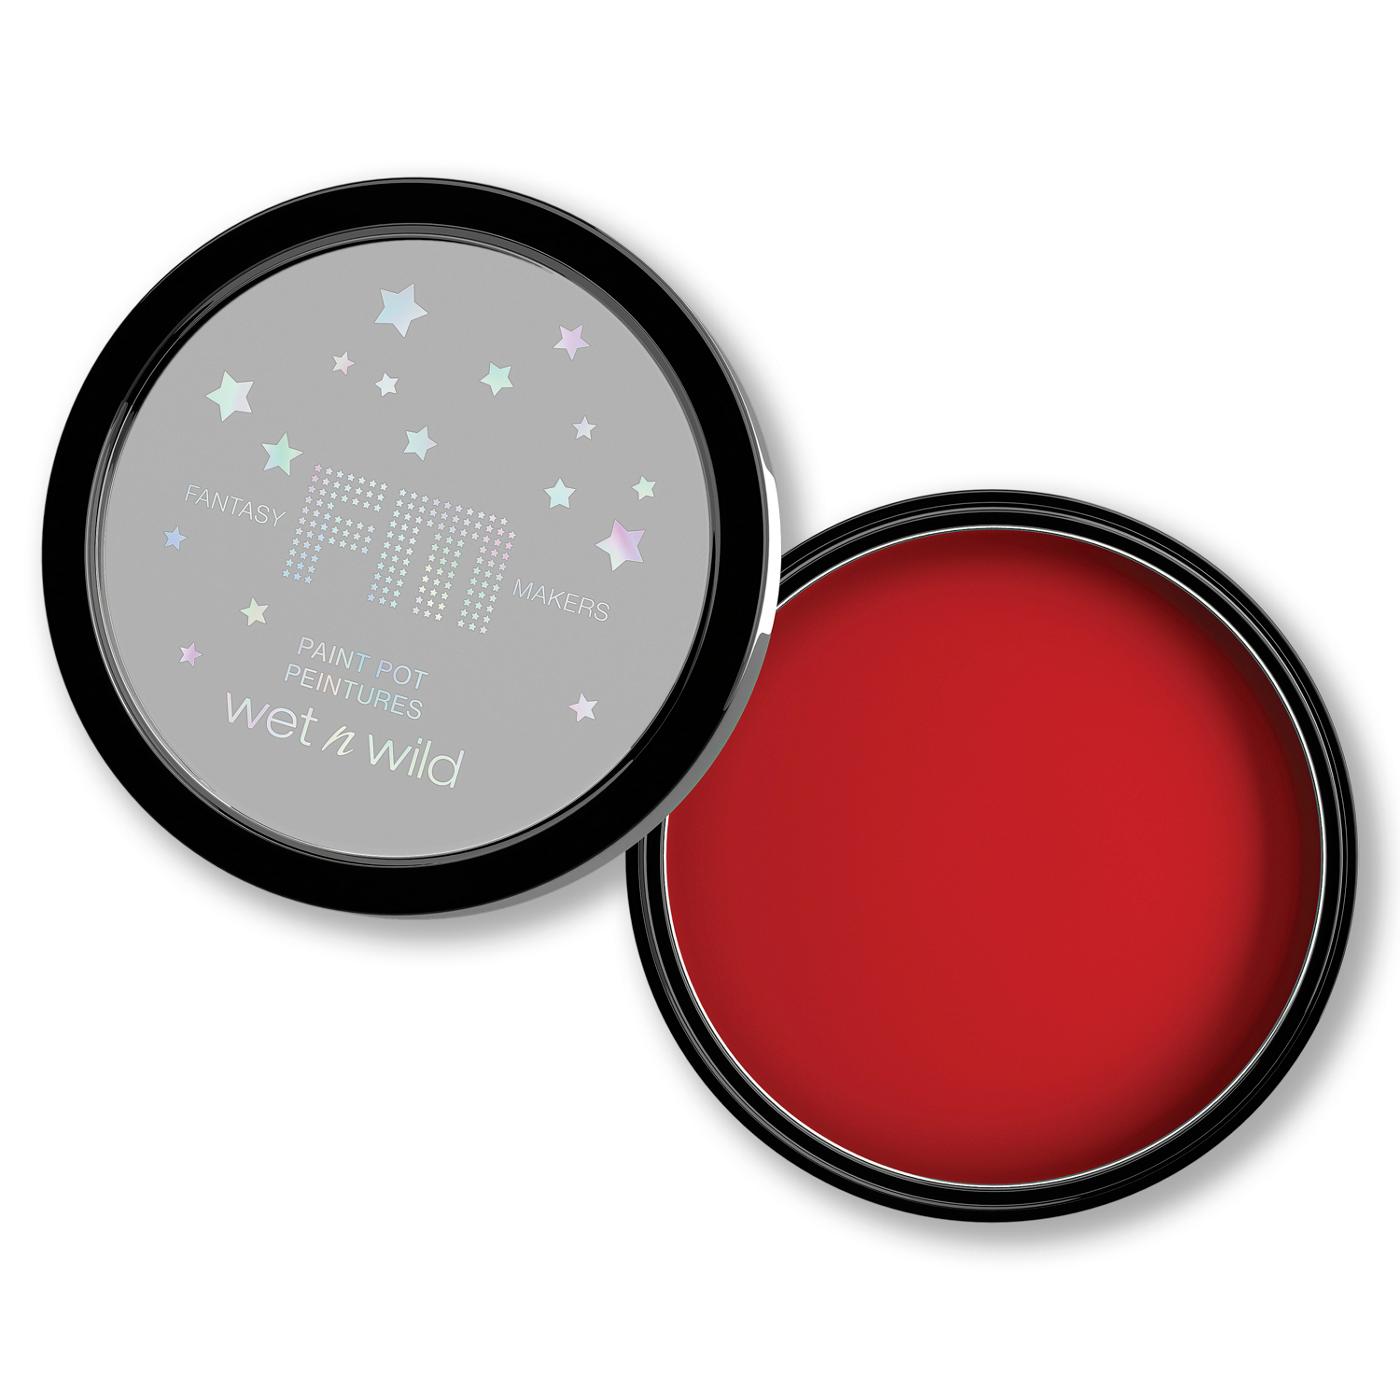 Wet n Wild Fantasy Makers Paint Pot Red; image 2 of 2